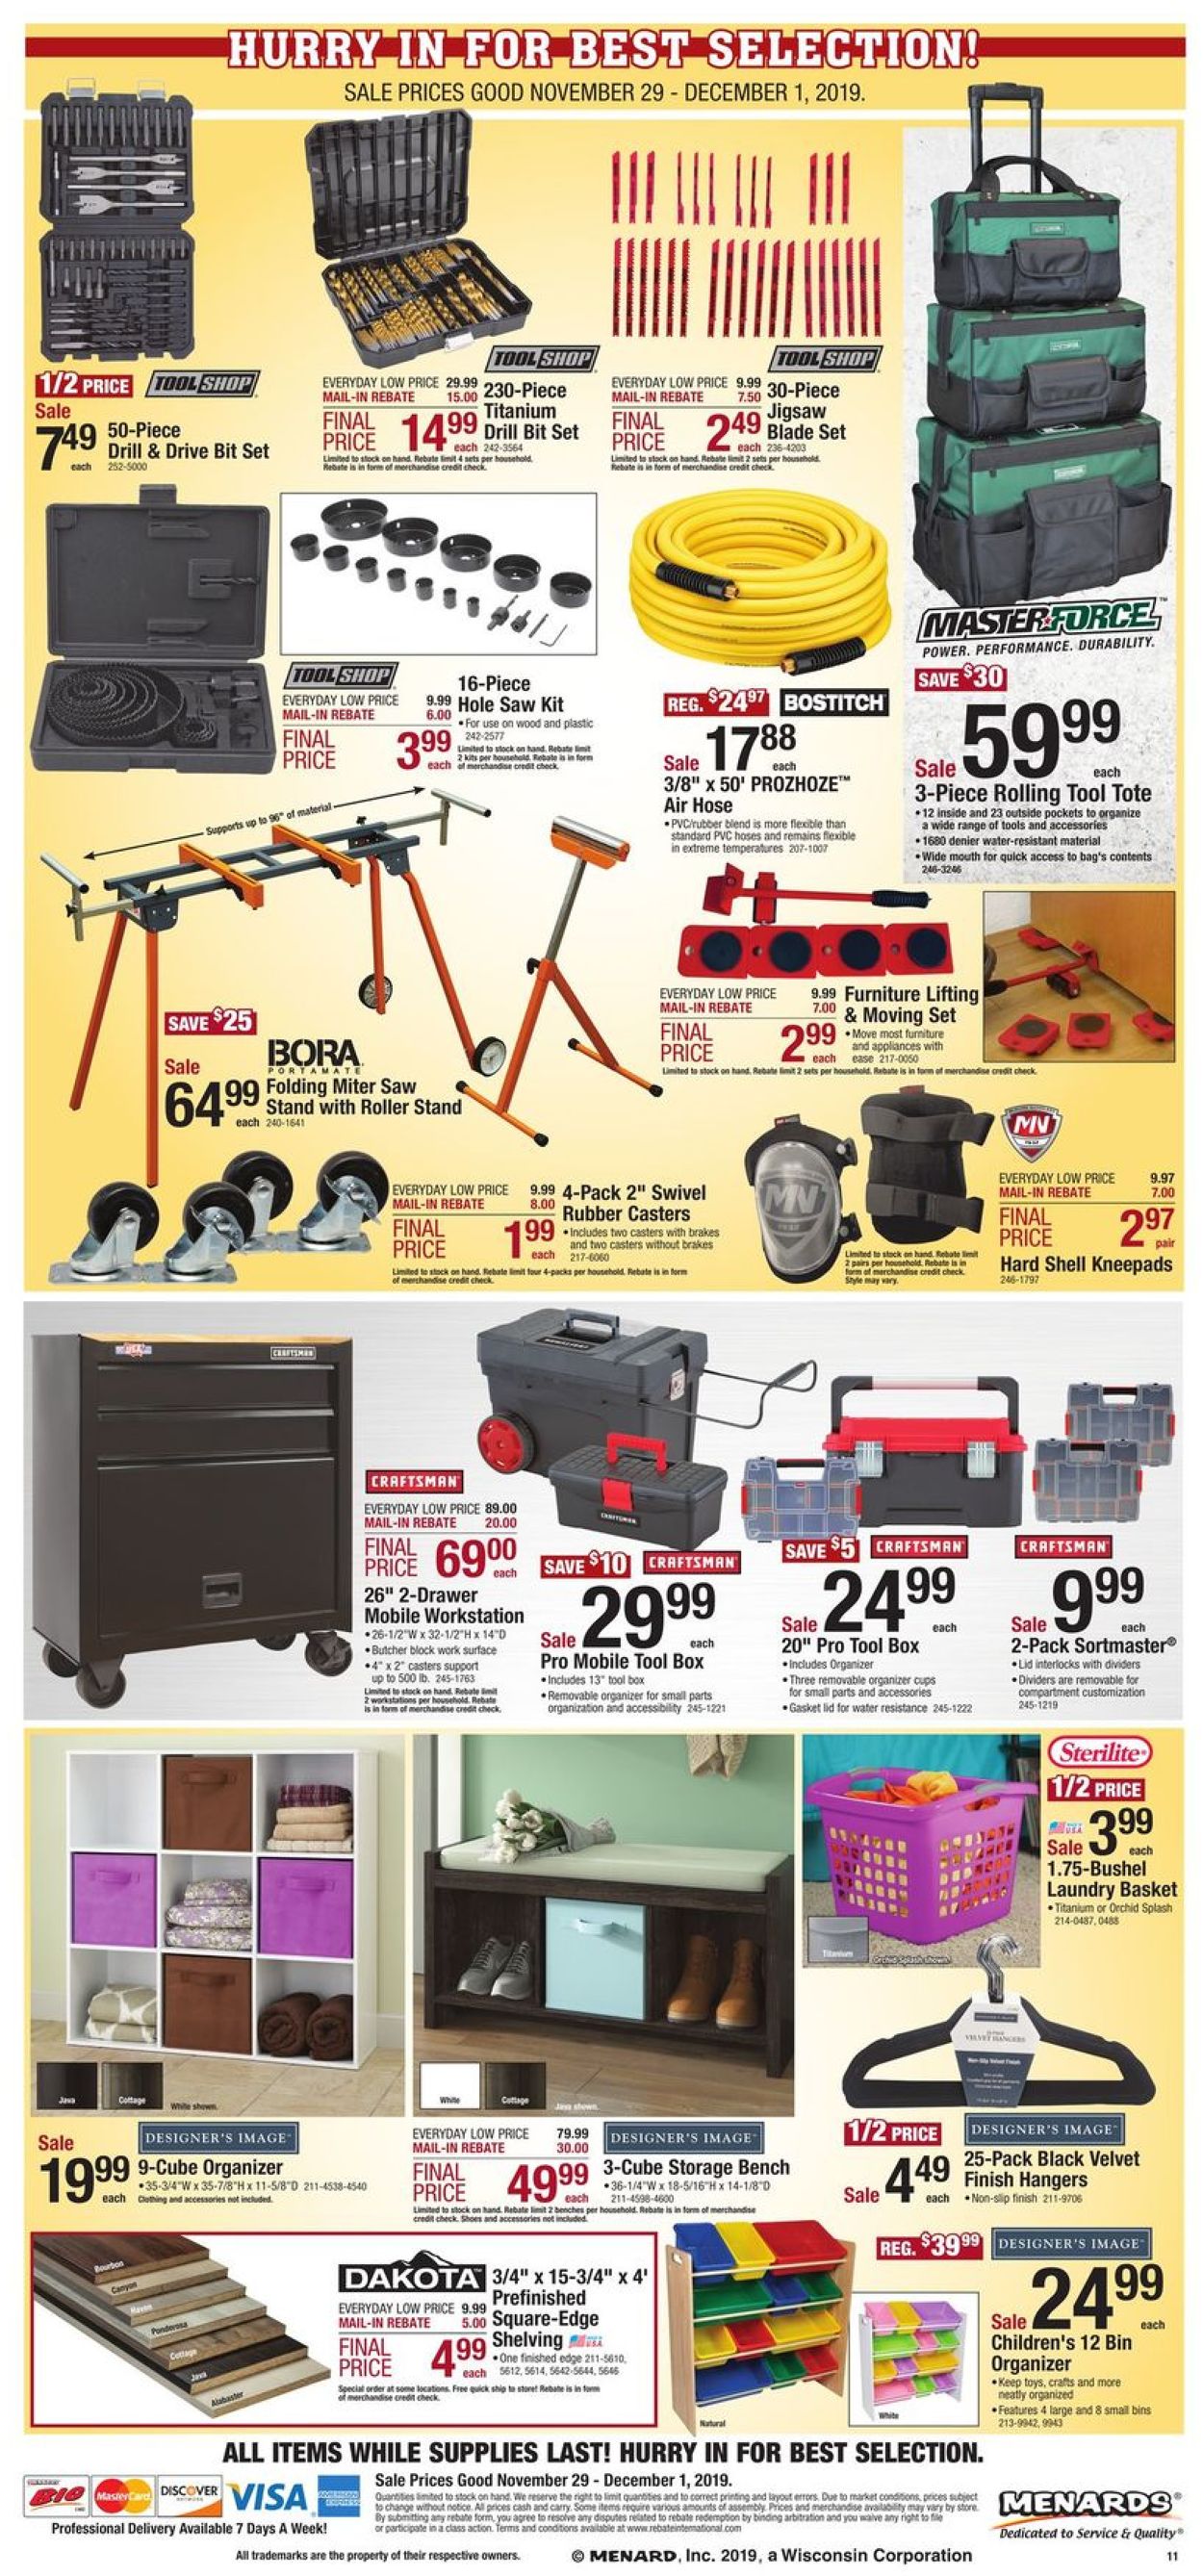 Menards - Black Friday Sale 2019 Current weekly ad 11/29 - 12/01/2019 [10] - 0